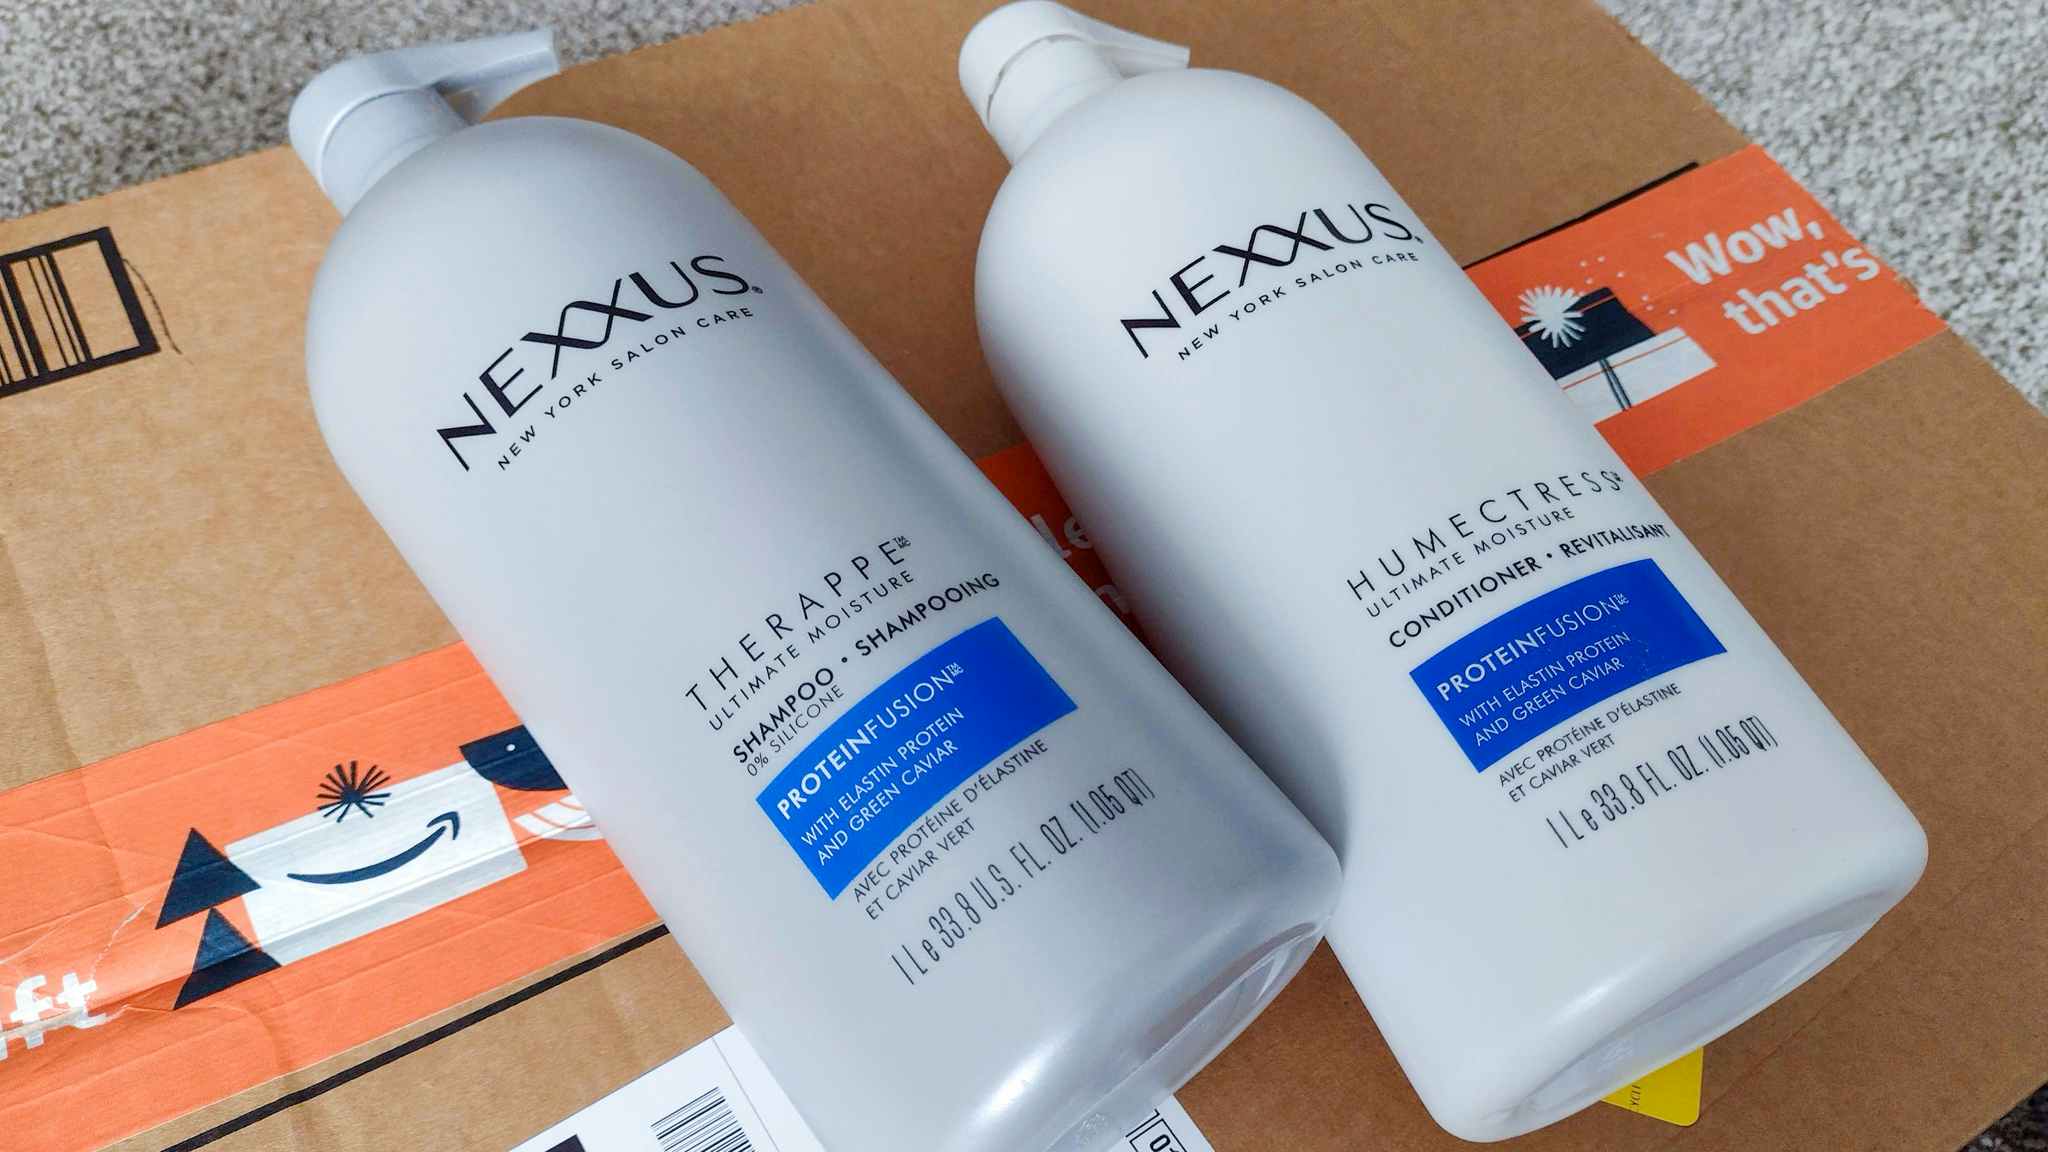 Nexxus shampoo and conditioner on top of an amazon box